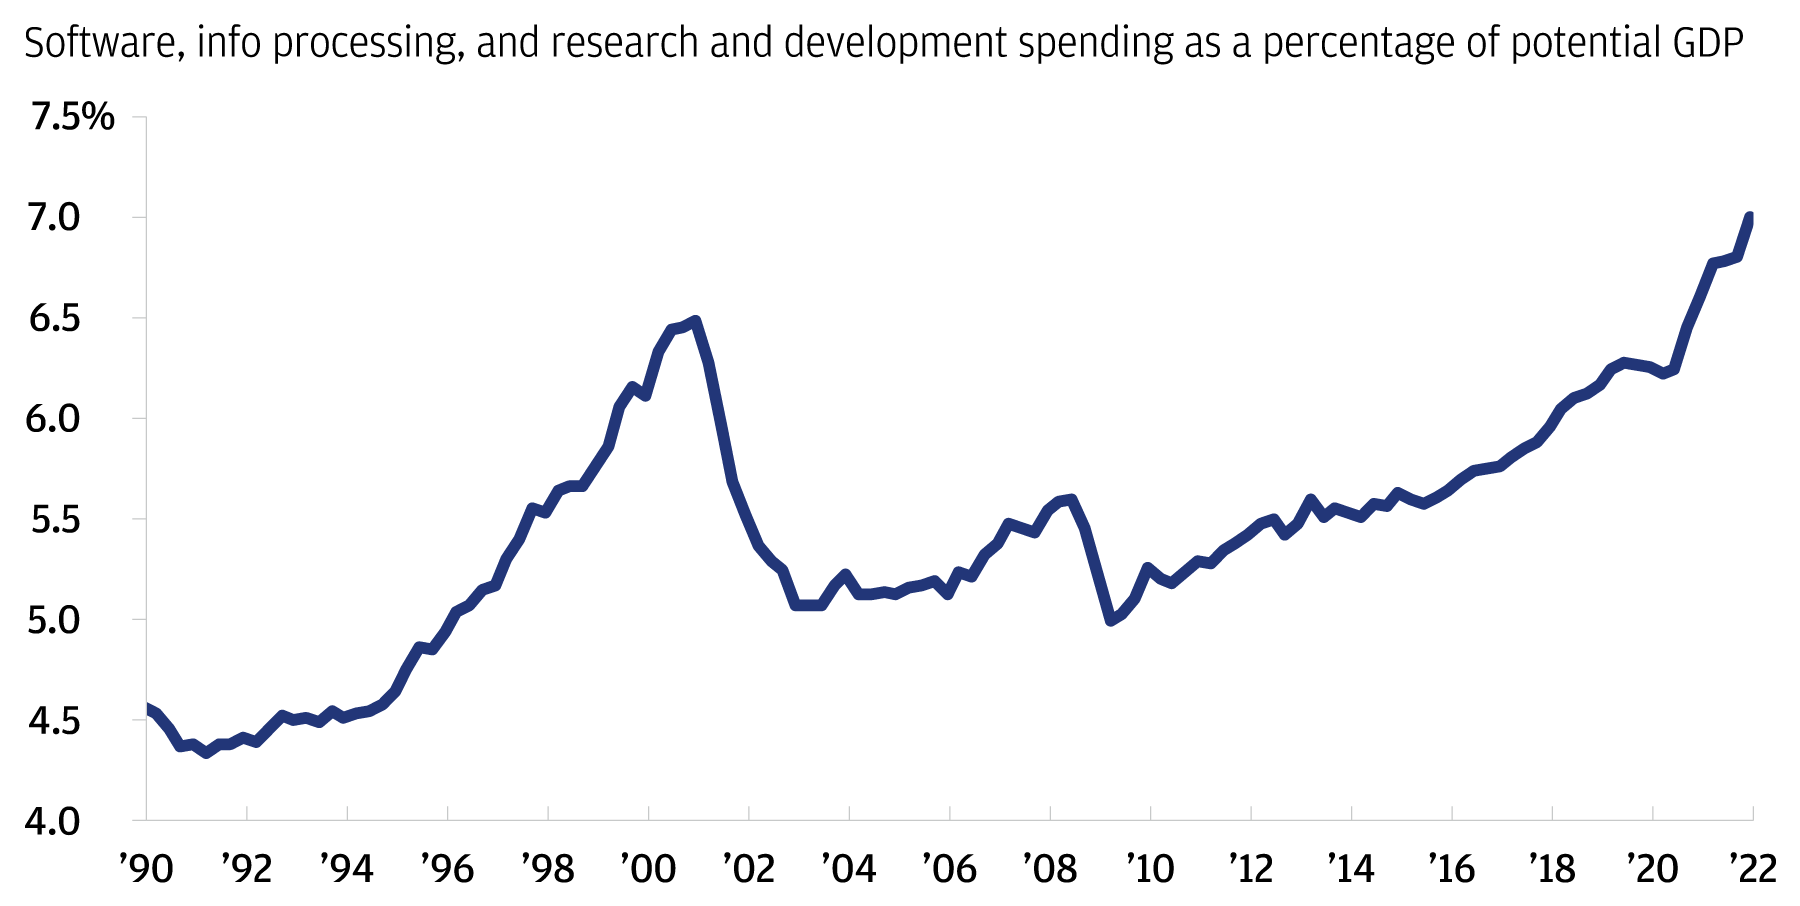 This chart shows private fixed investment in software, info processing, and research and development spending as a percentage of potential GDP since 1990.